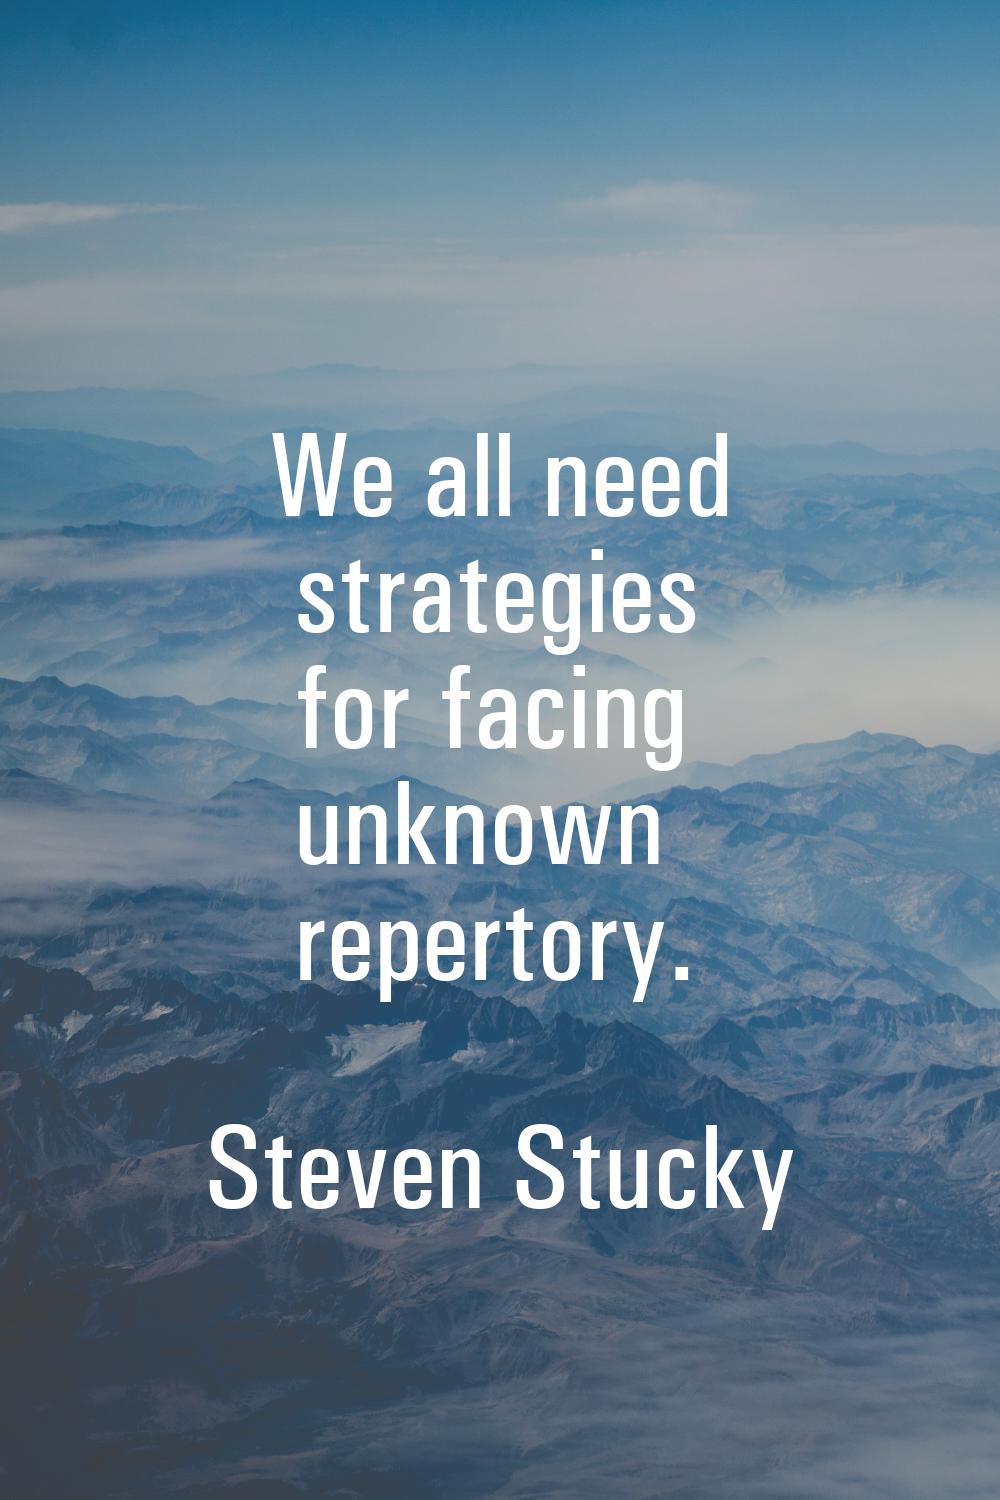 We all need strategies for facing unknown repertory.